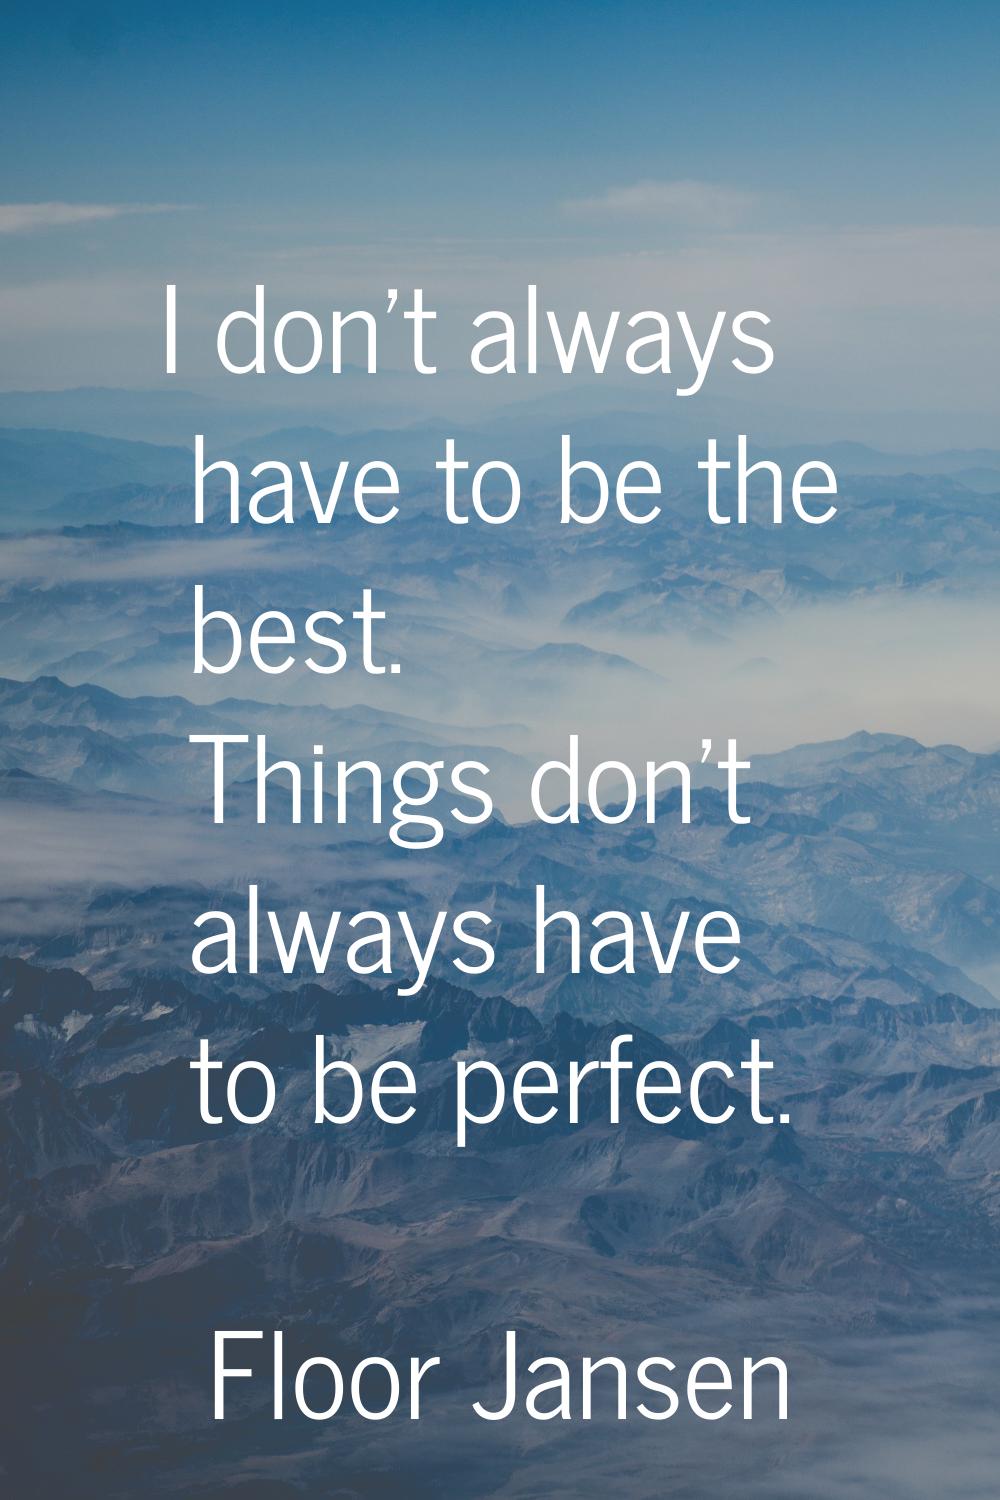 I don't always have to be the best. Things don't always have to be perfect.